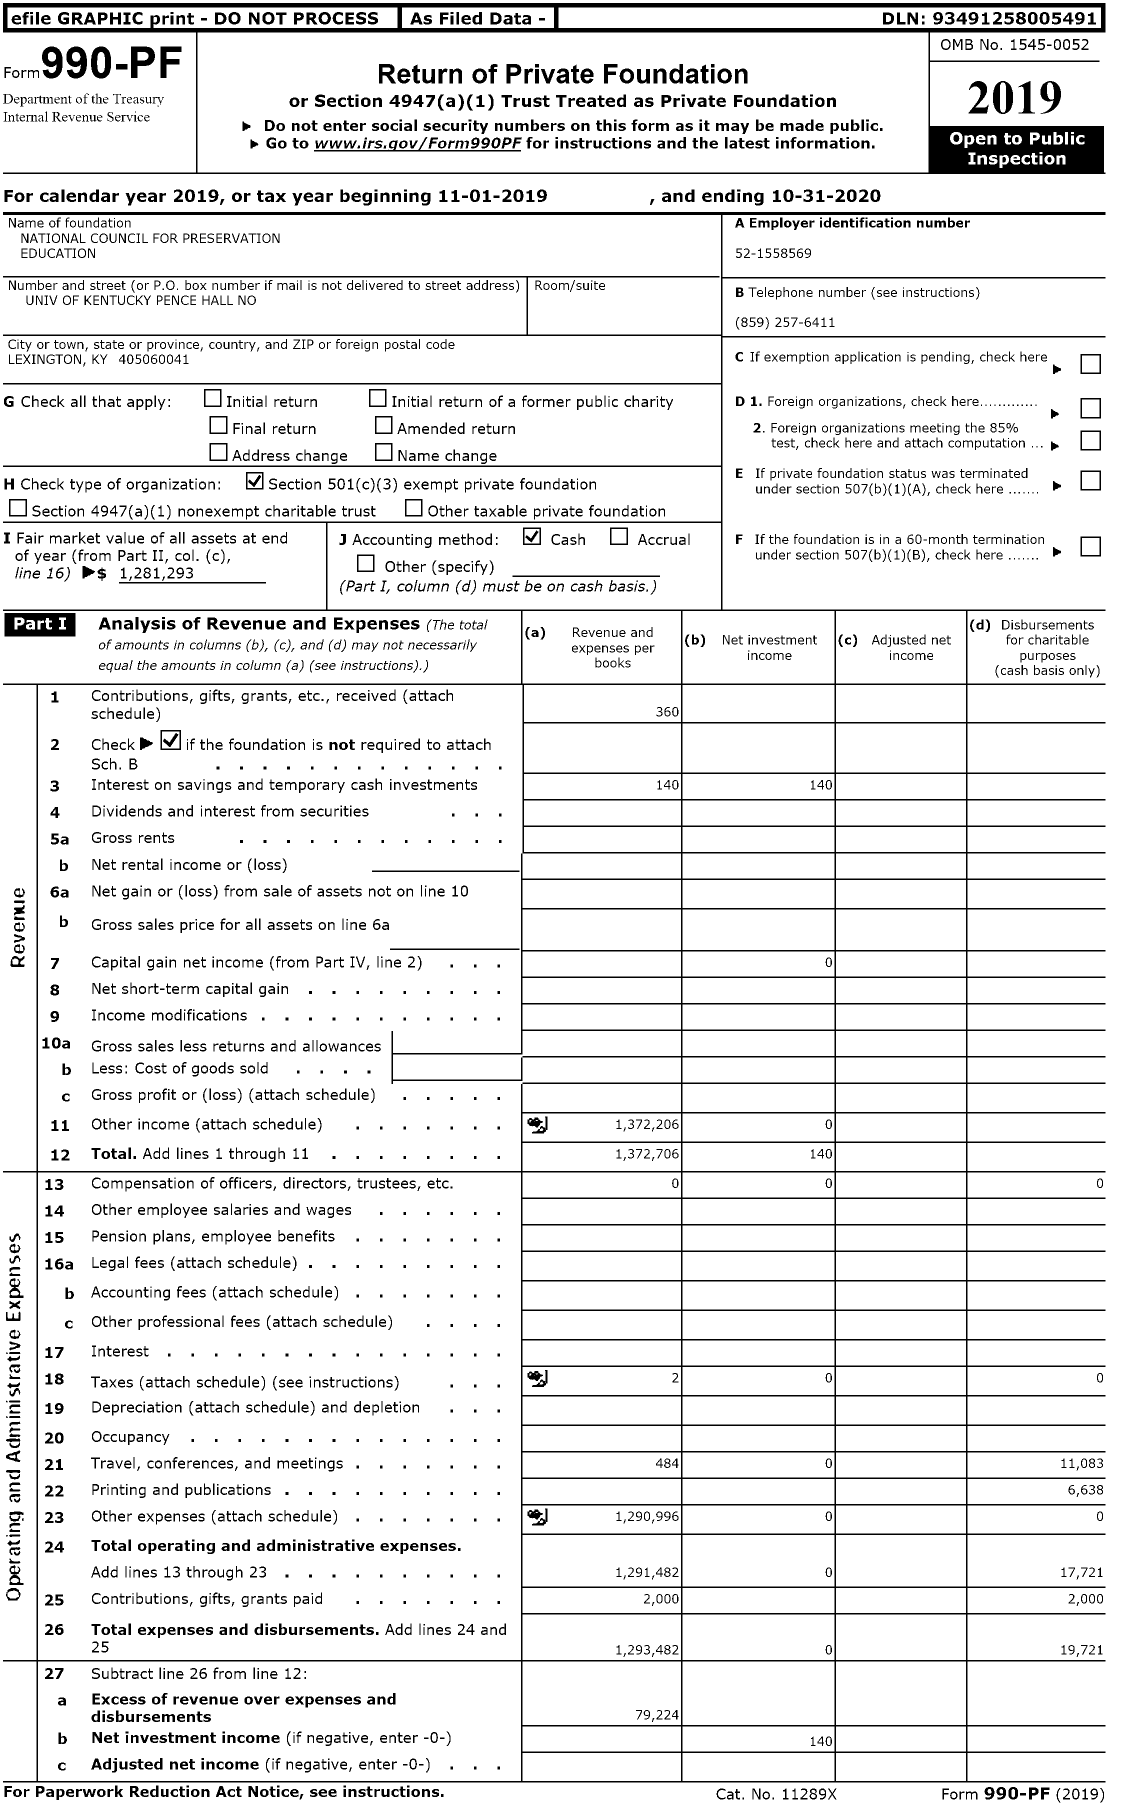 Image of first page of 2019 Form 990PF for National Council For Preservation Education